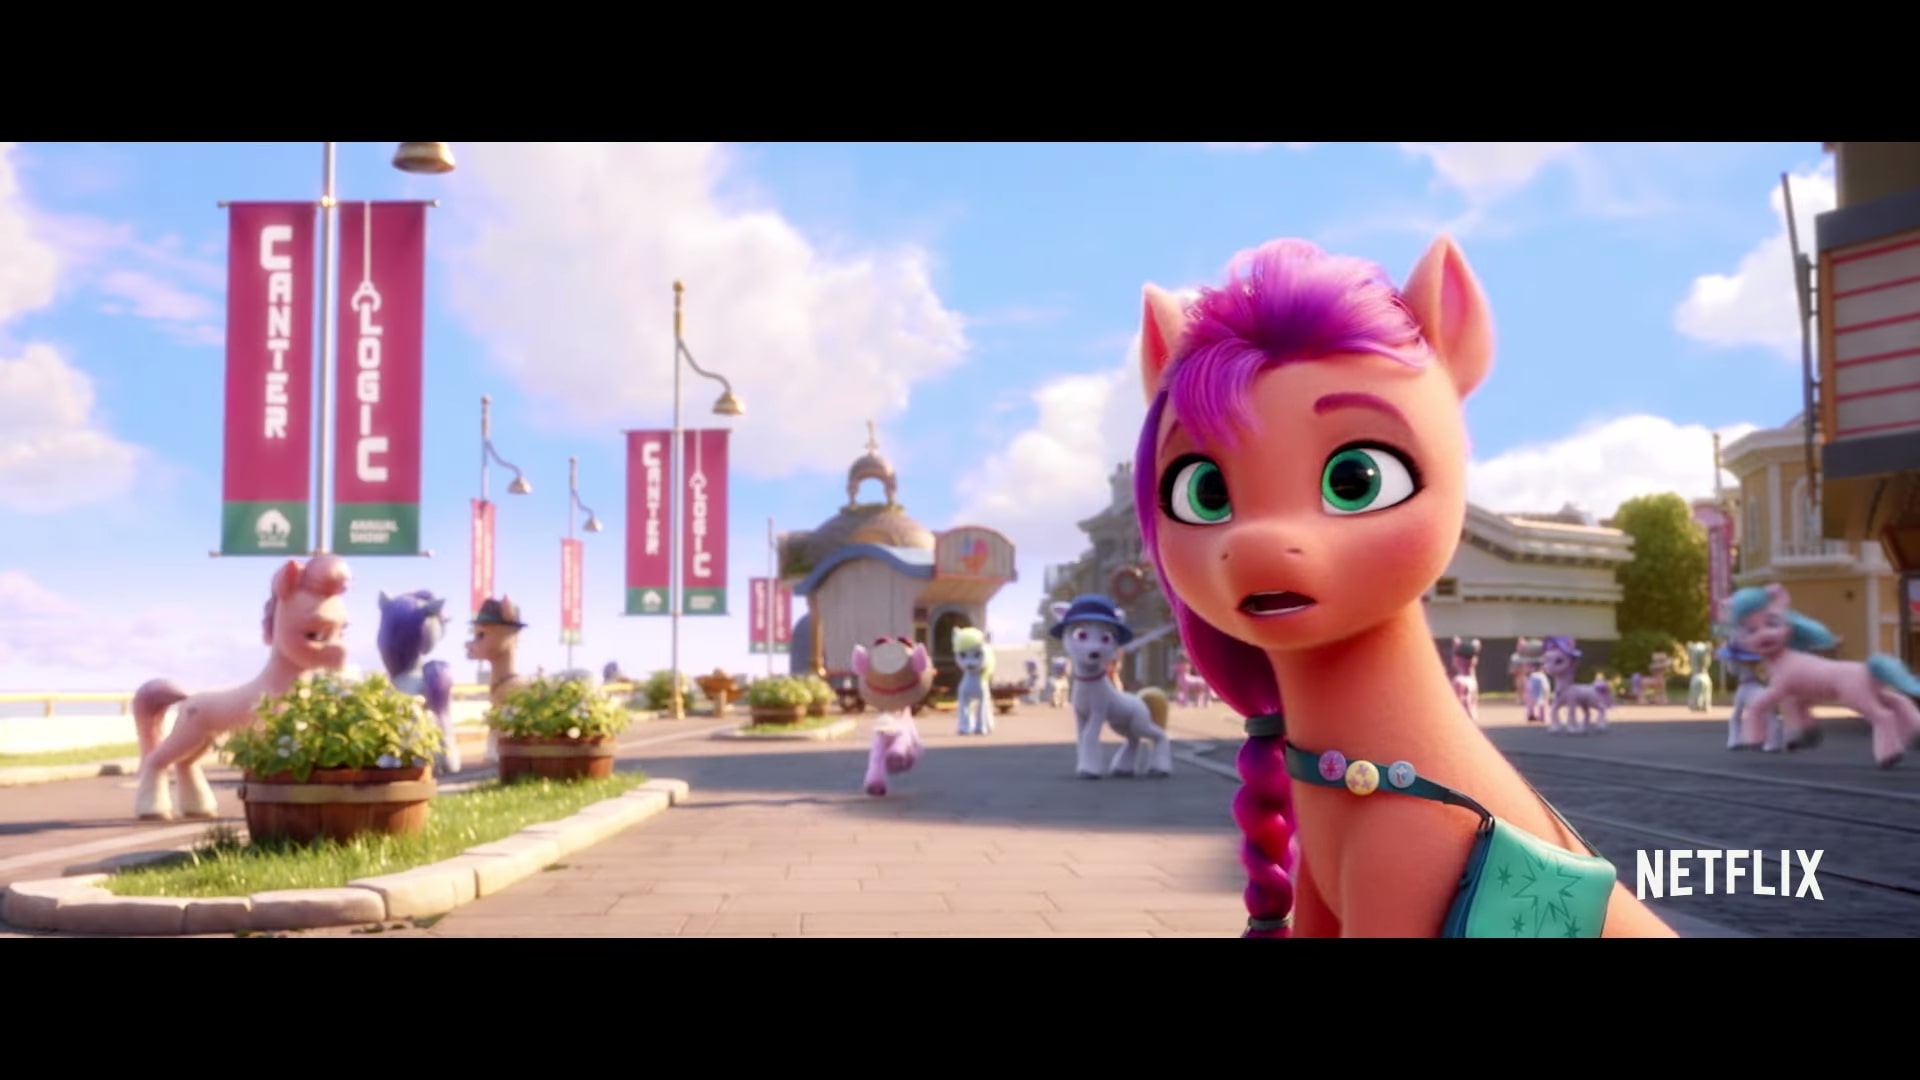 Netflix My Little Pony A New Generation Trailer, Coming to Netflix in September 2021